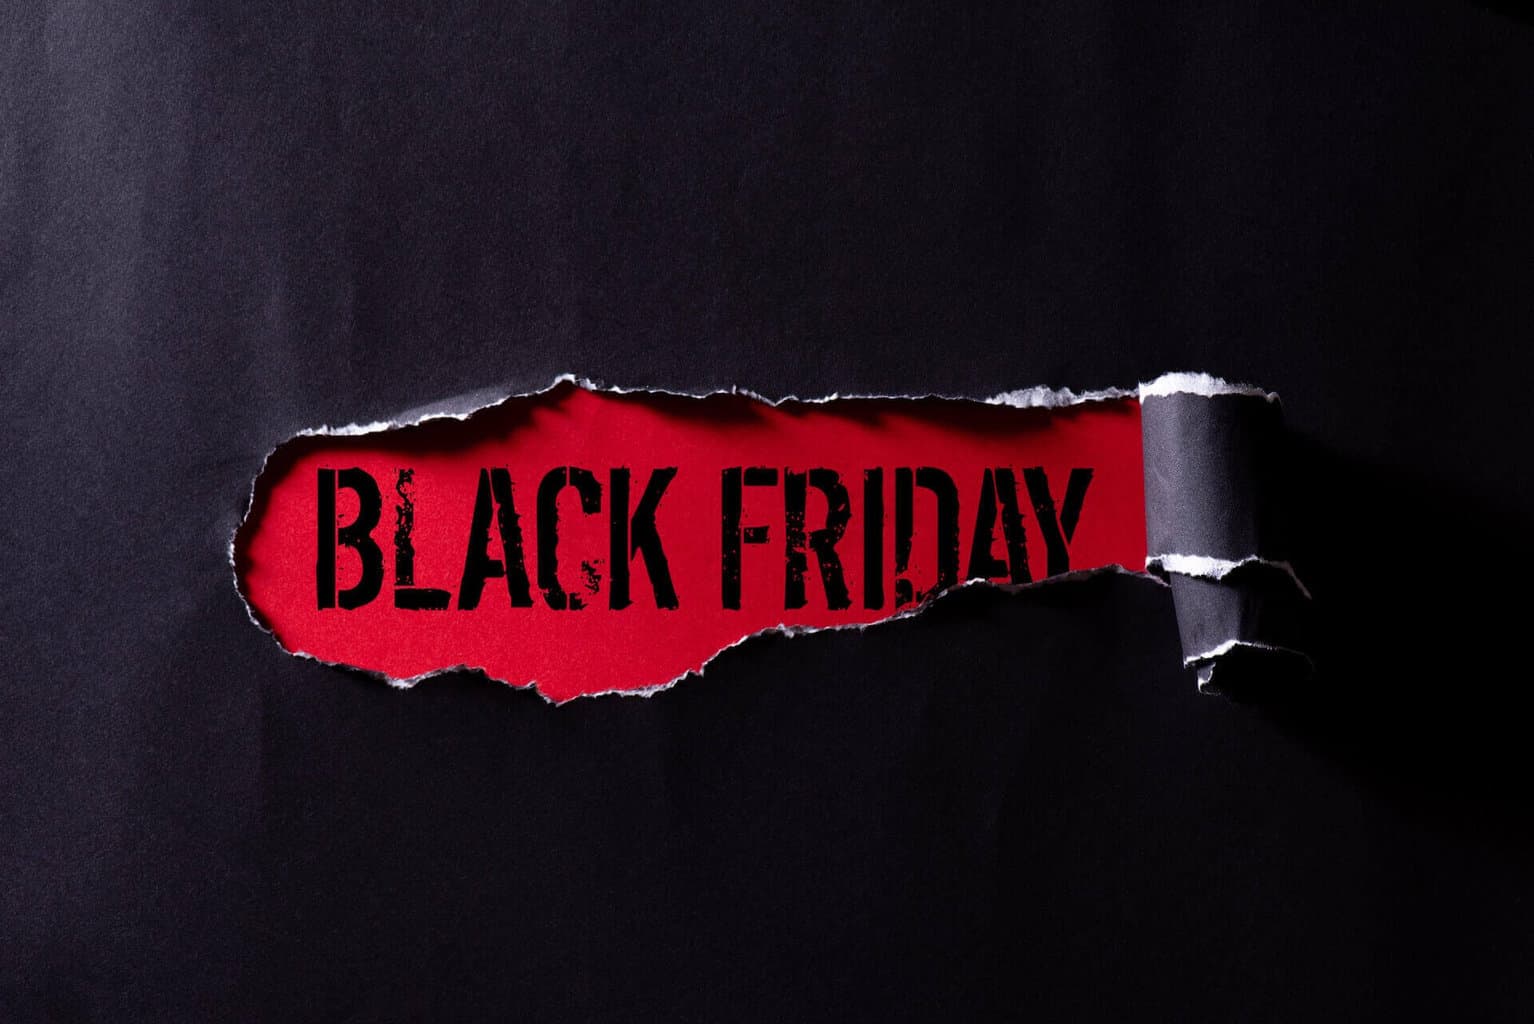 Black torn paper and the text "Black Friday" on a red background